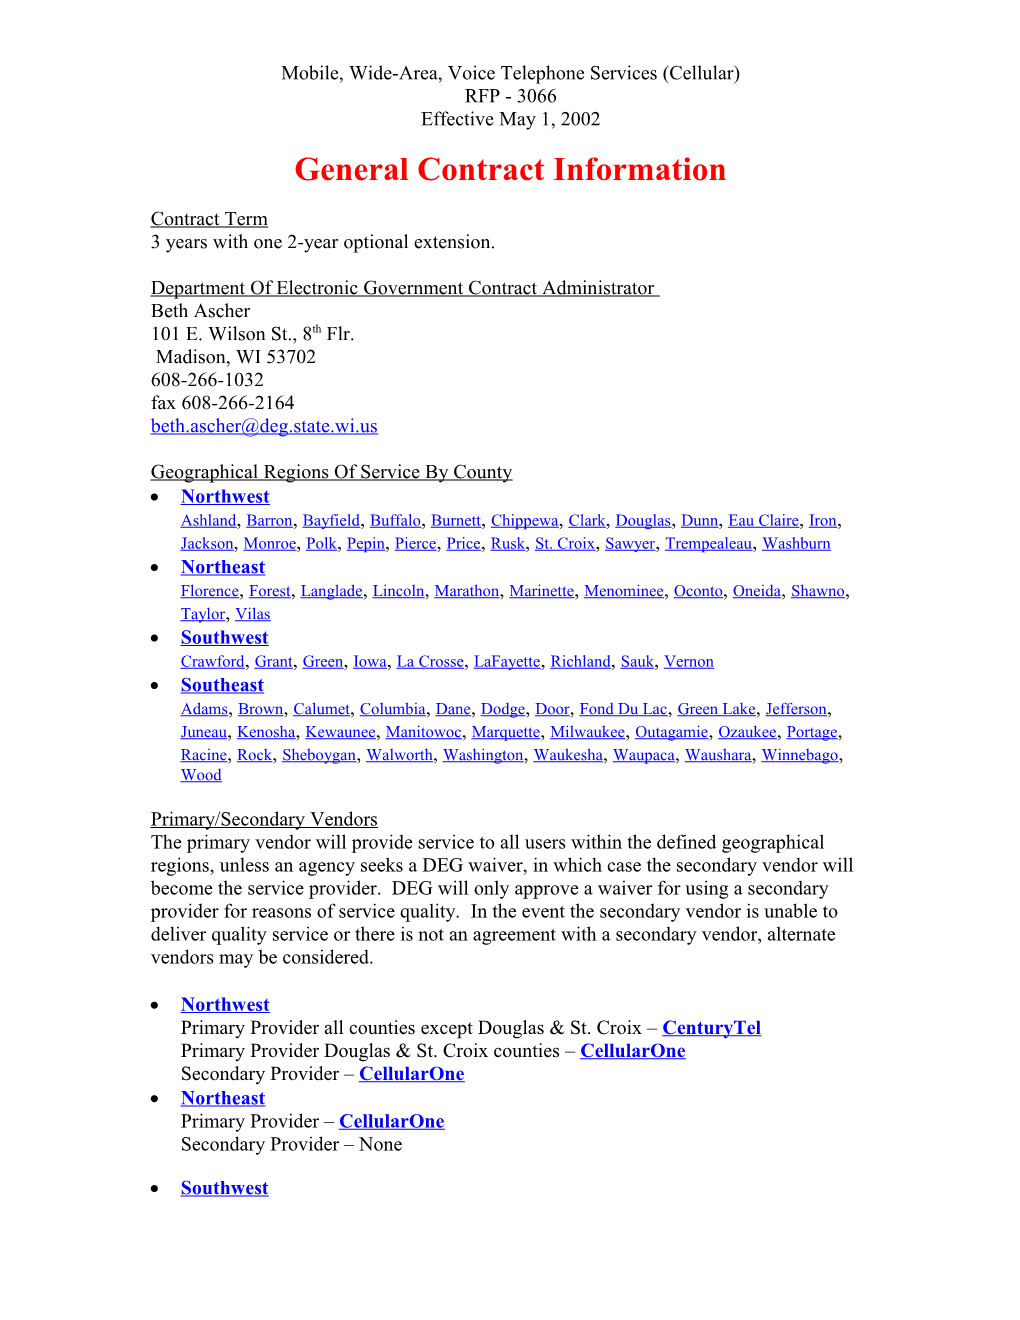 General Contract Information